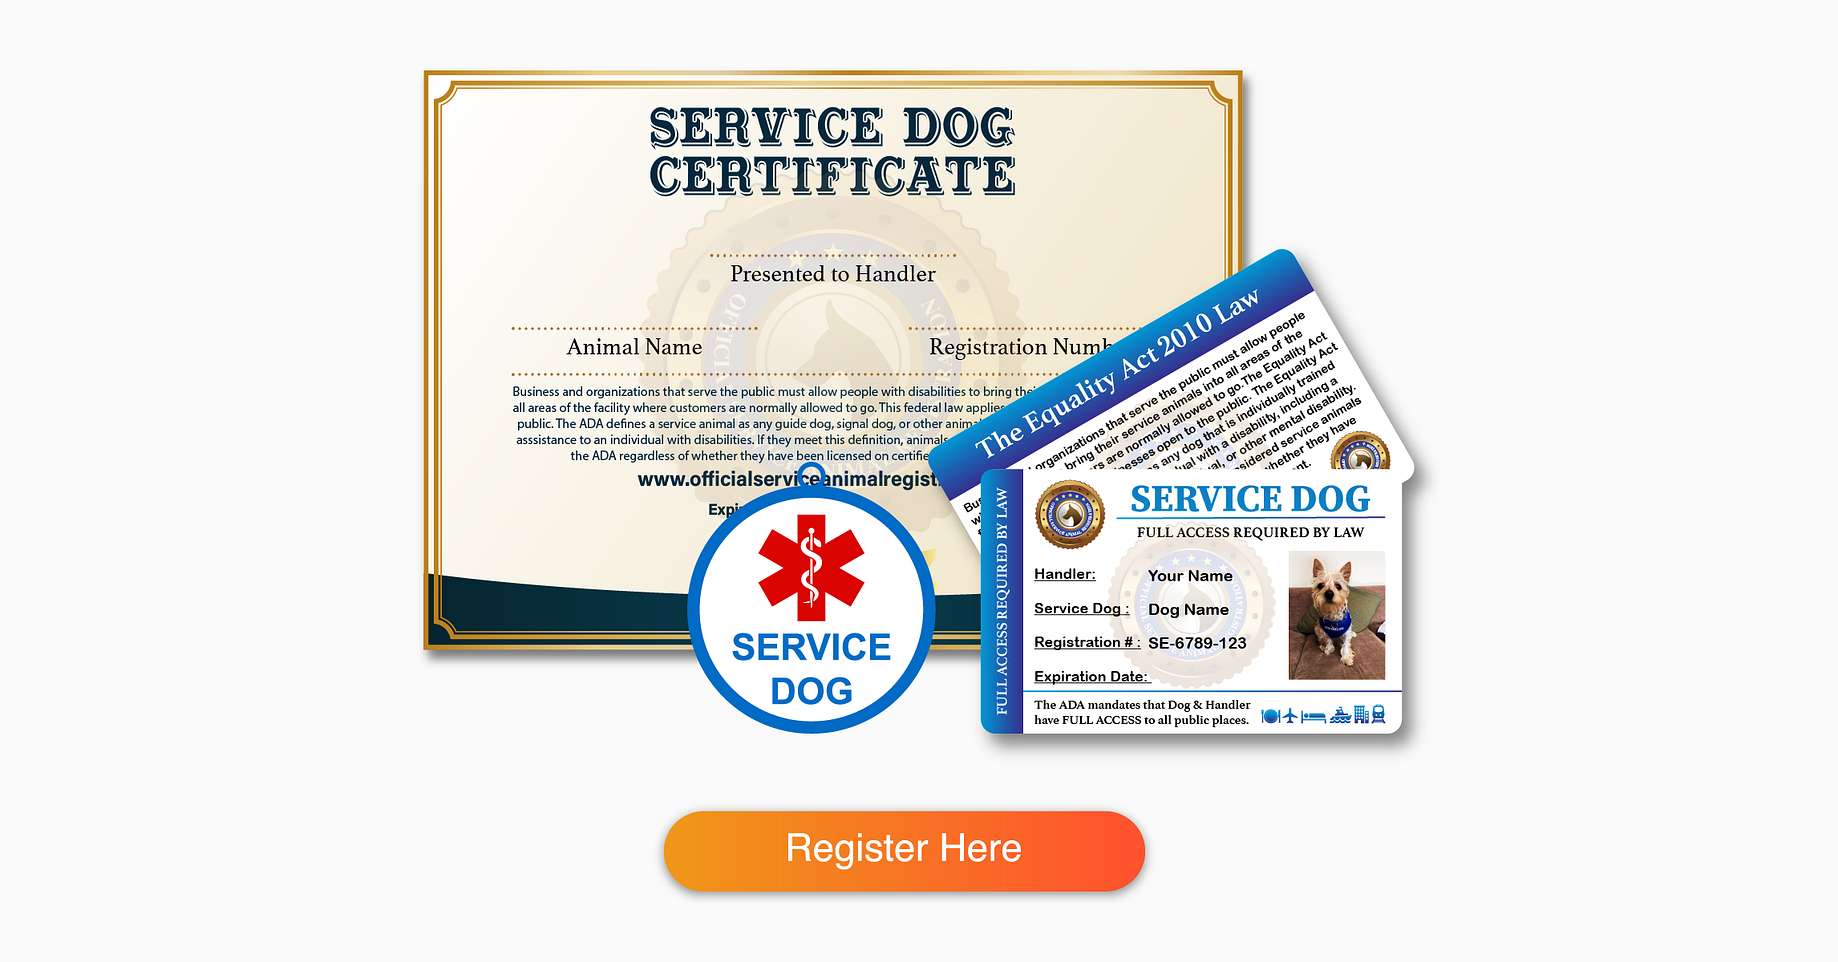 How To Register A Dog As Service Dog In Ontario Canada By Supportdogcertification Org Medium